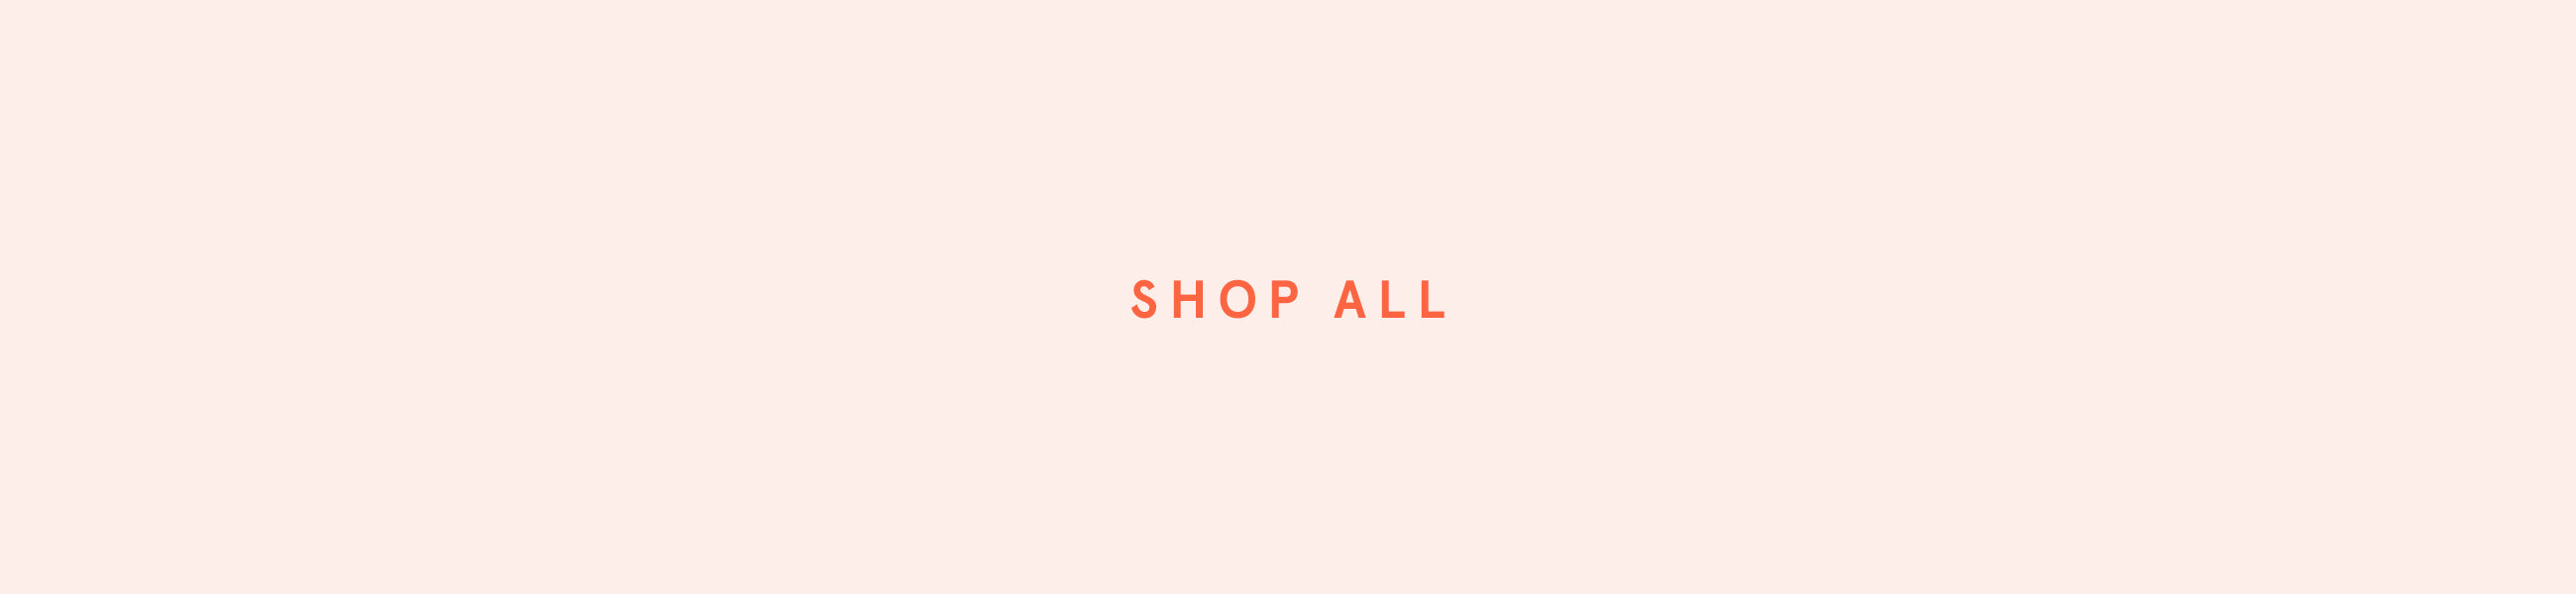 Student Gifts | Shop All